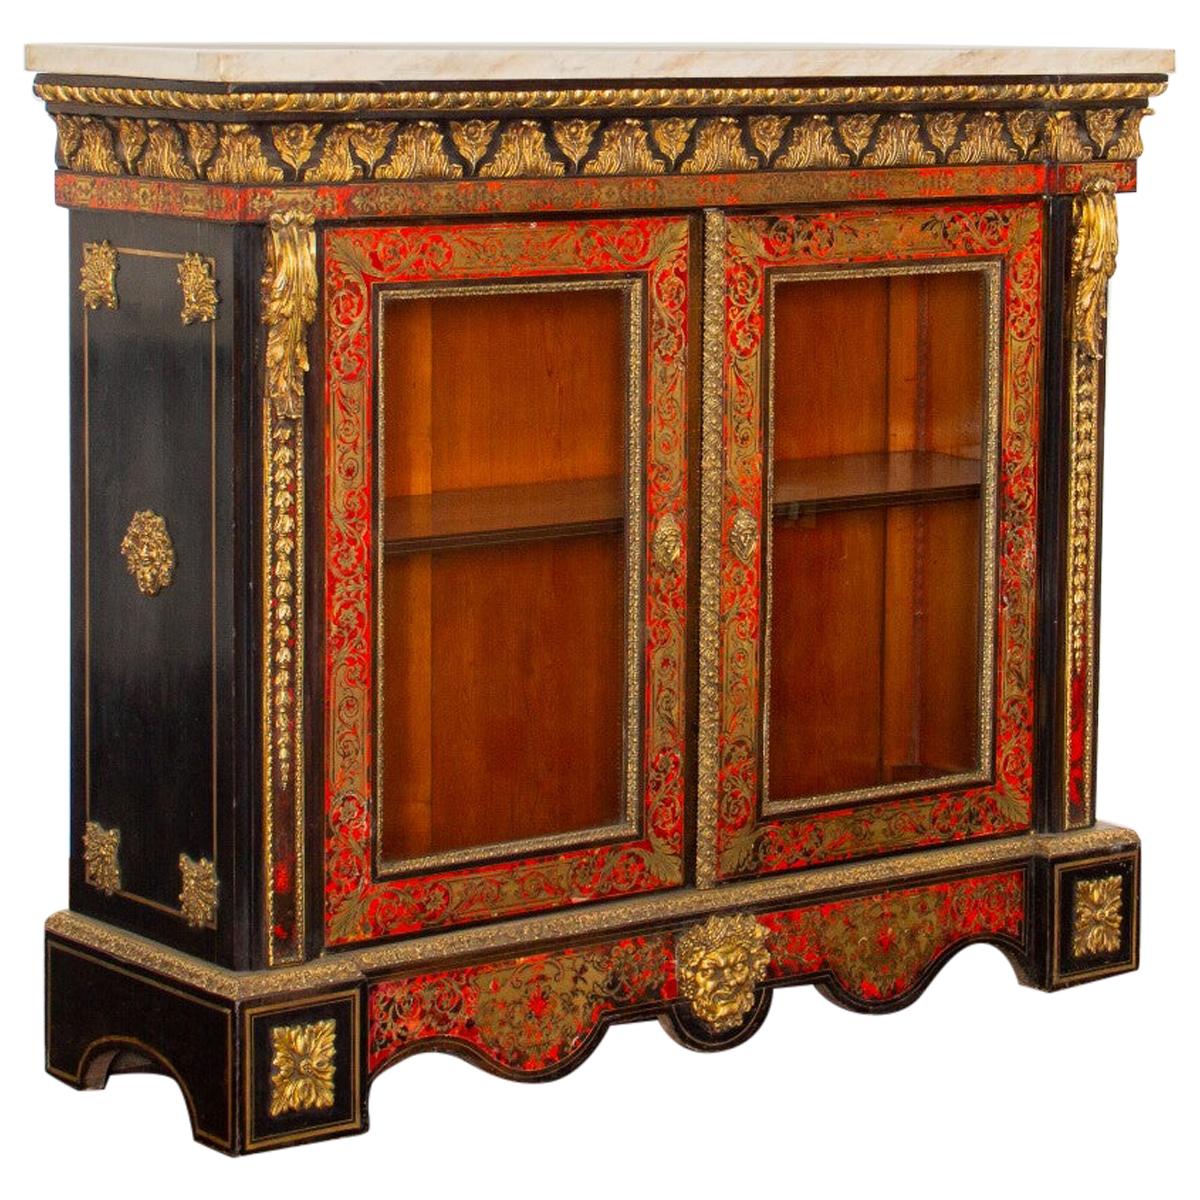 Substantial 19th Century French Boulle Glazed Cabinet